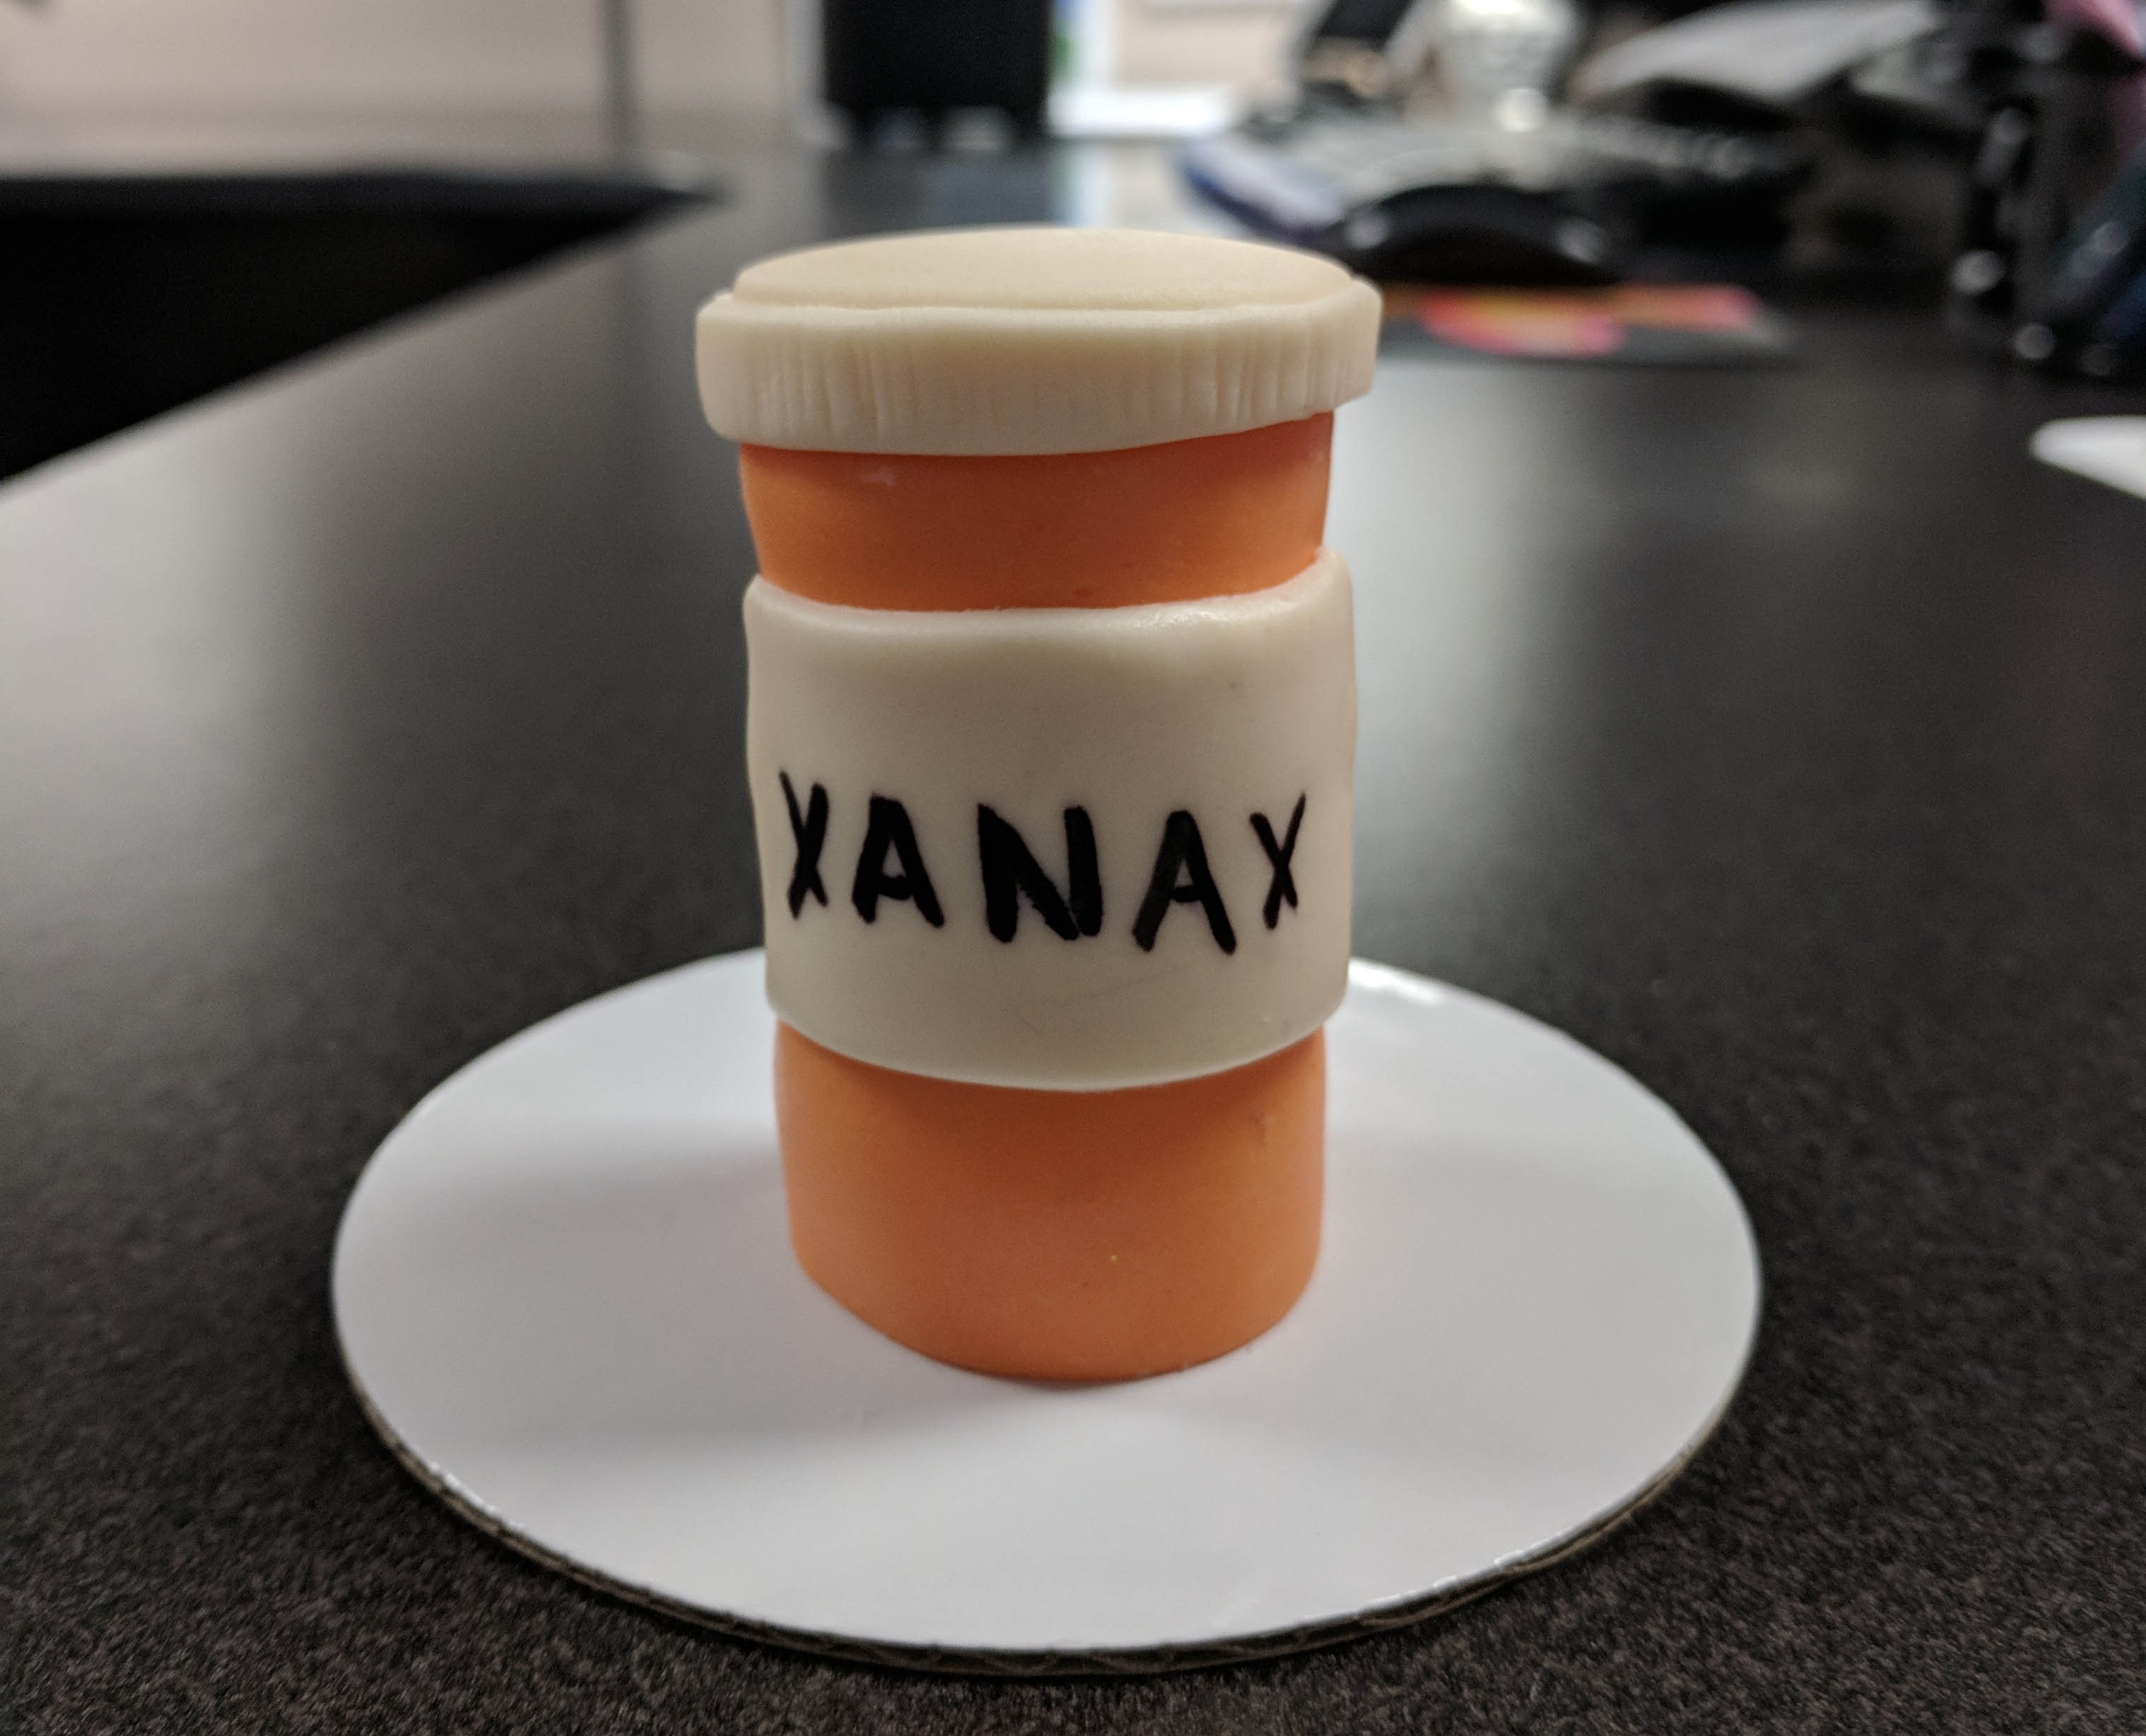 Cakes and Contracts: Migrating Contracts xanax cake